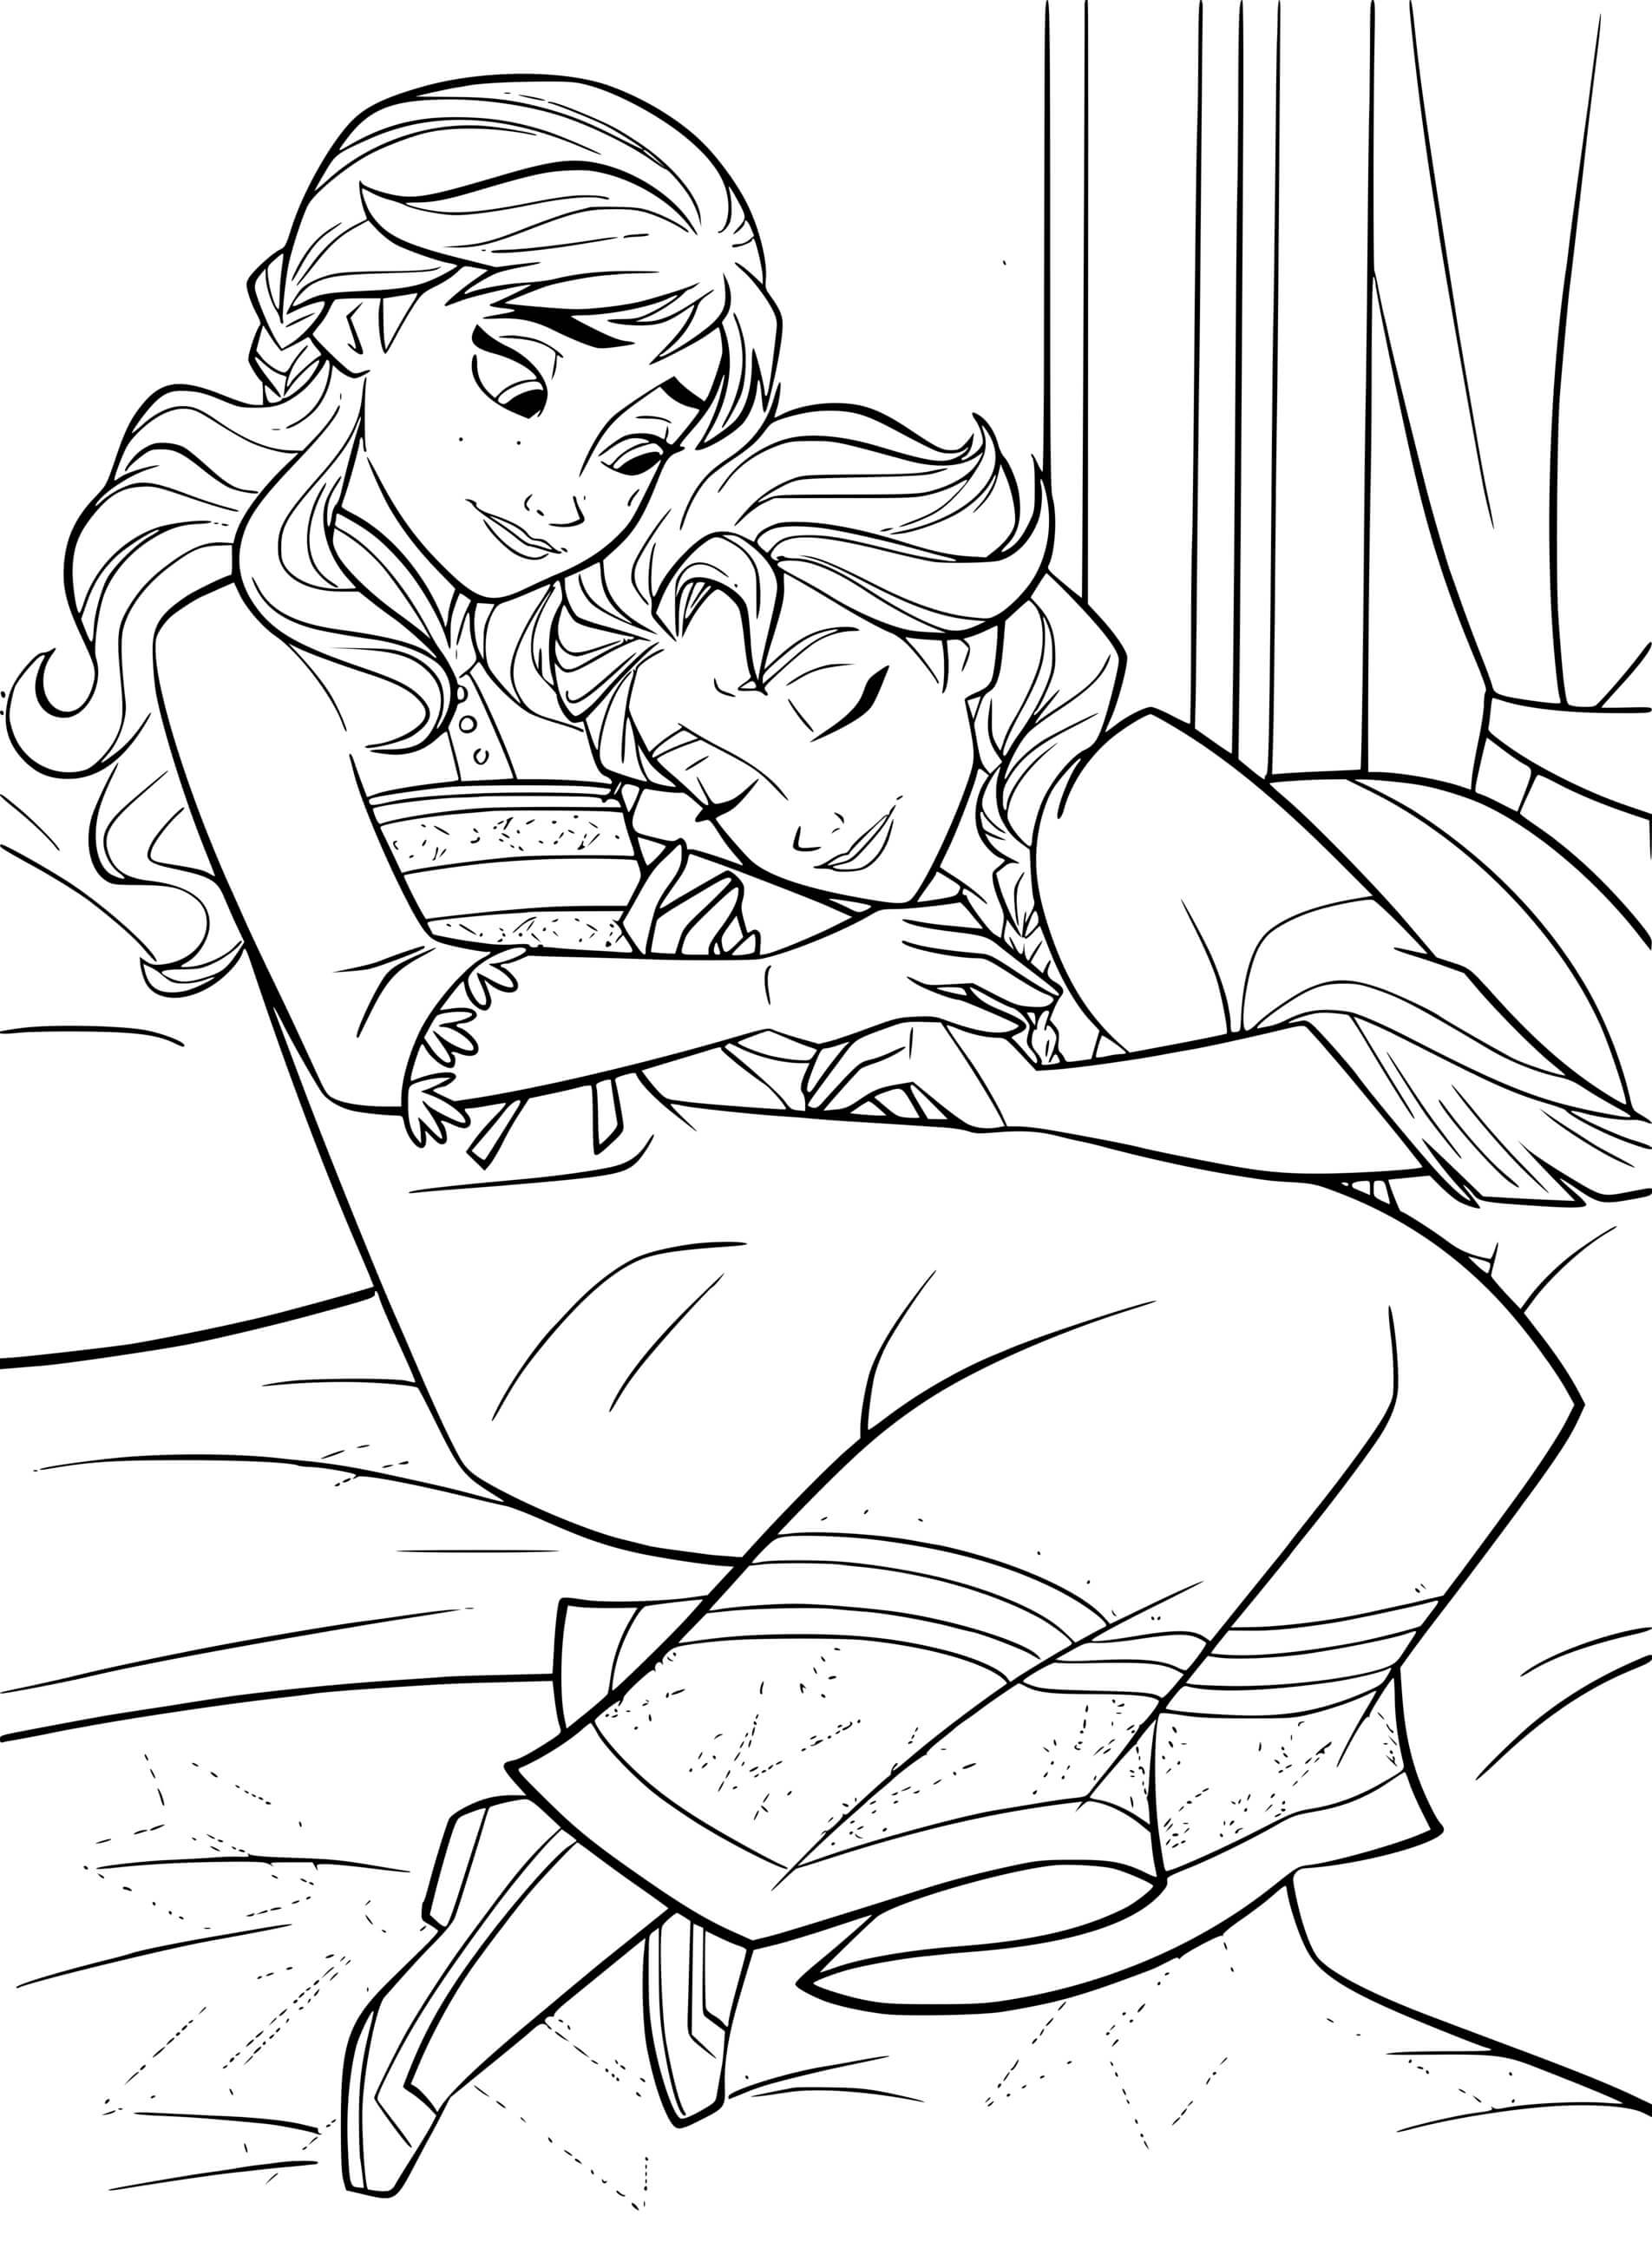 Frozen 2 Sister Anna And Elsa Coloring Page